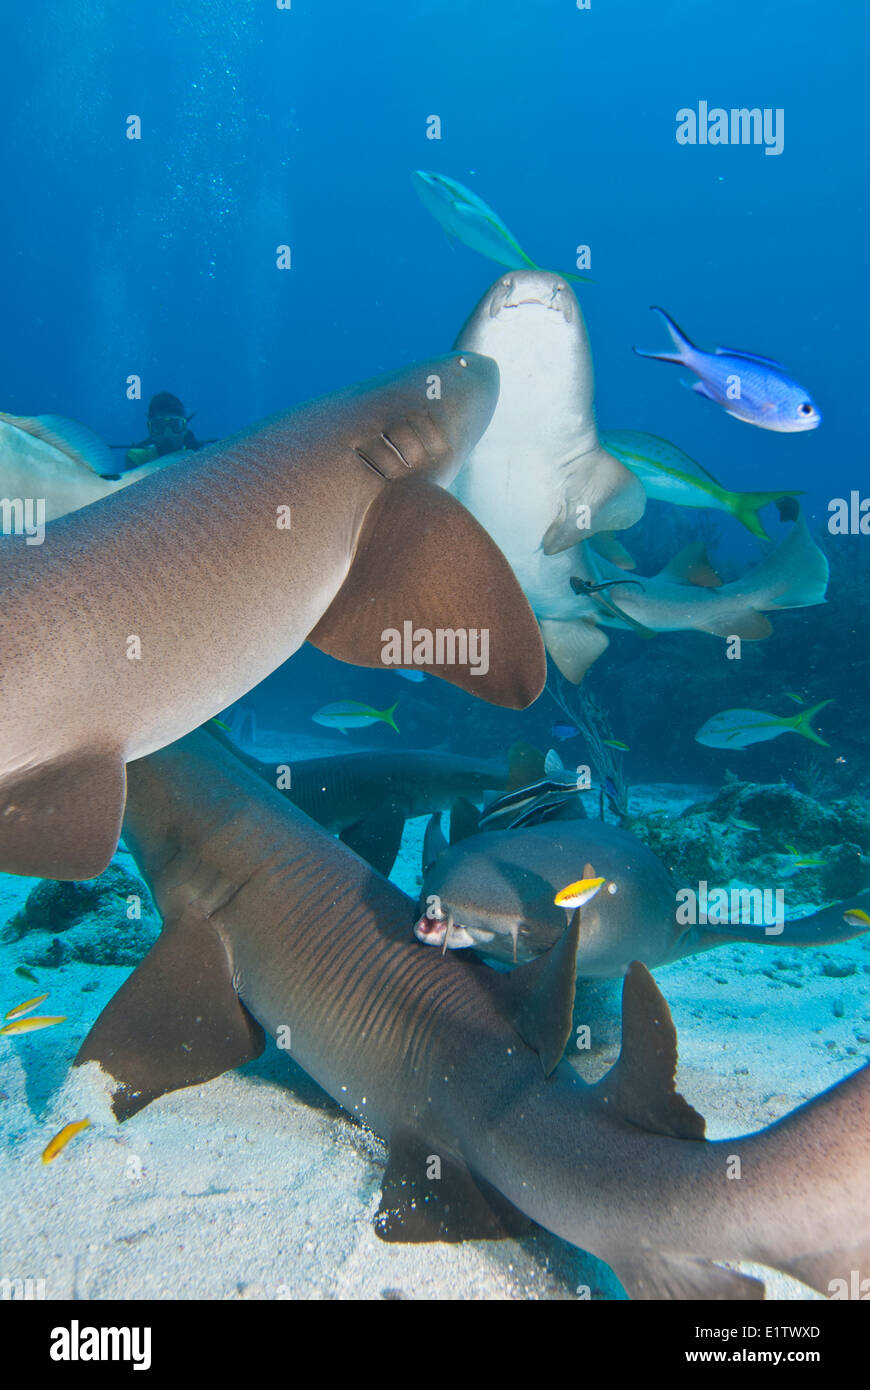 A group of nurse shark (Ginglymostoma cirratum) gather in search of food in San Pedro, Belize Stock Photo